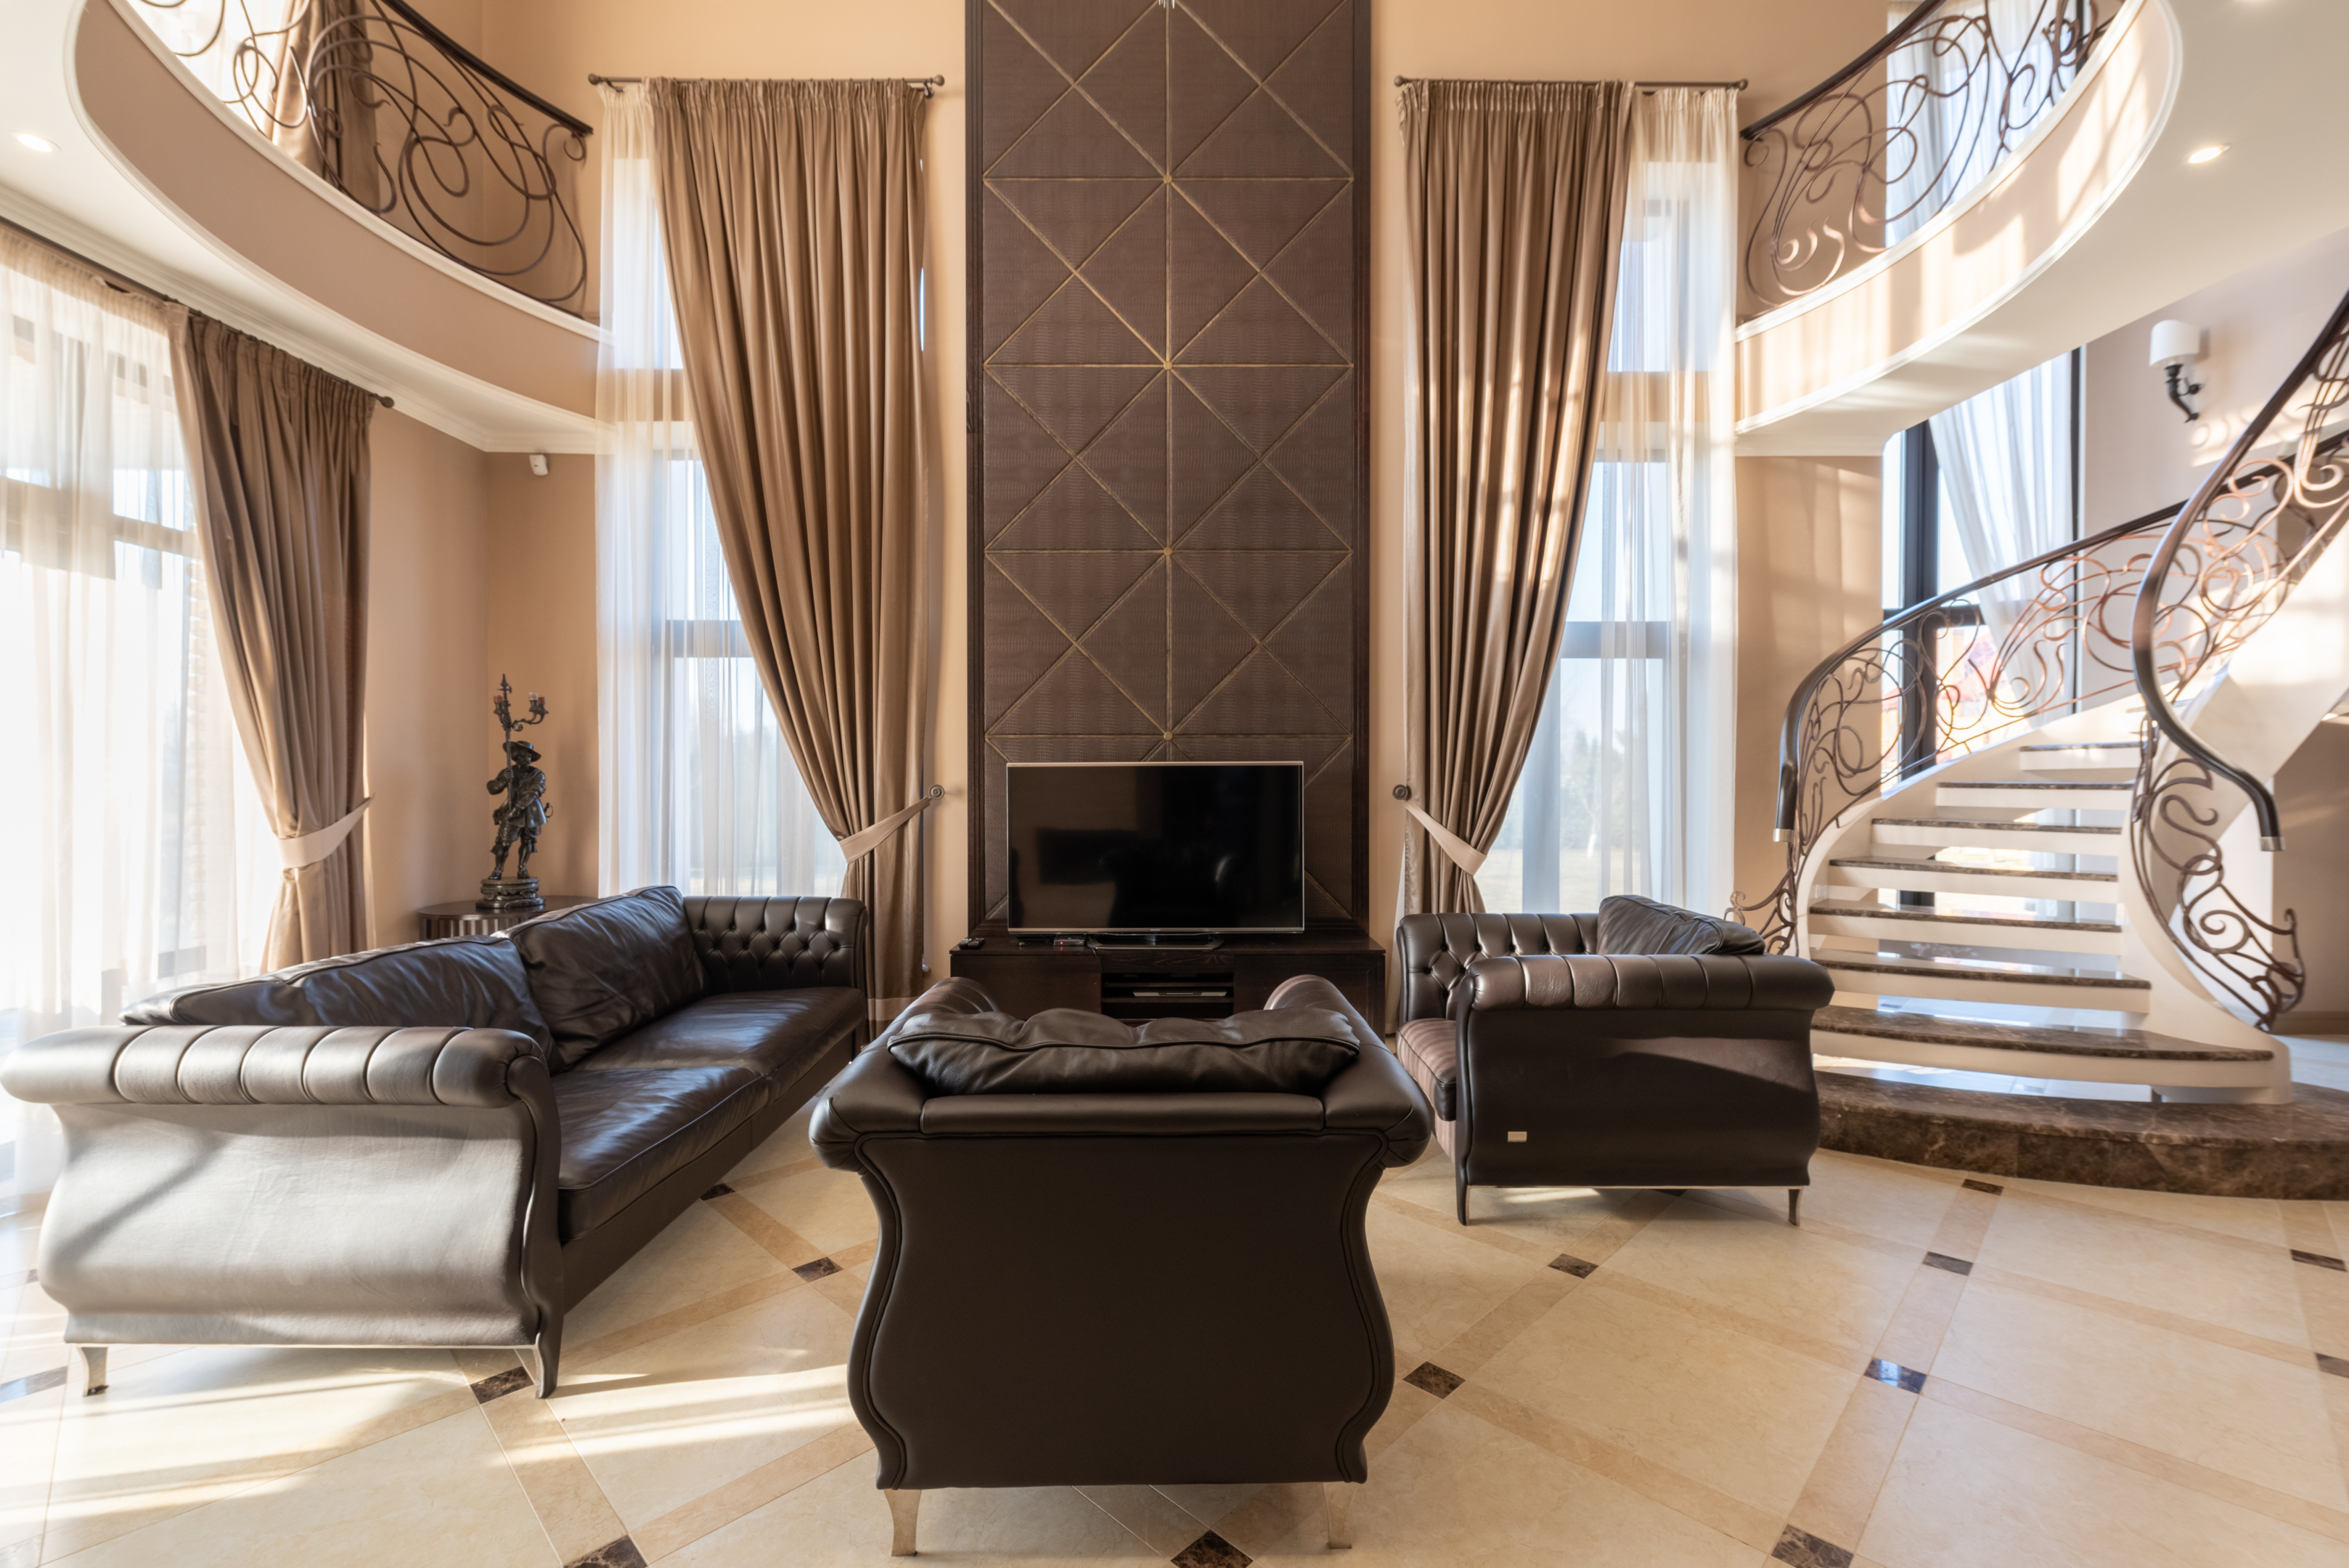 luxurious leather sofas in large room with staircase